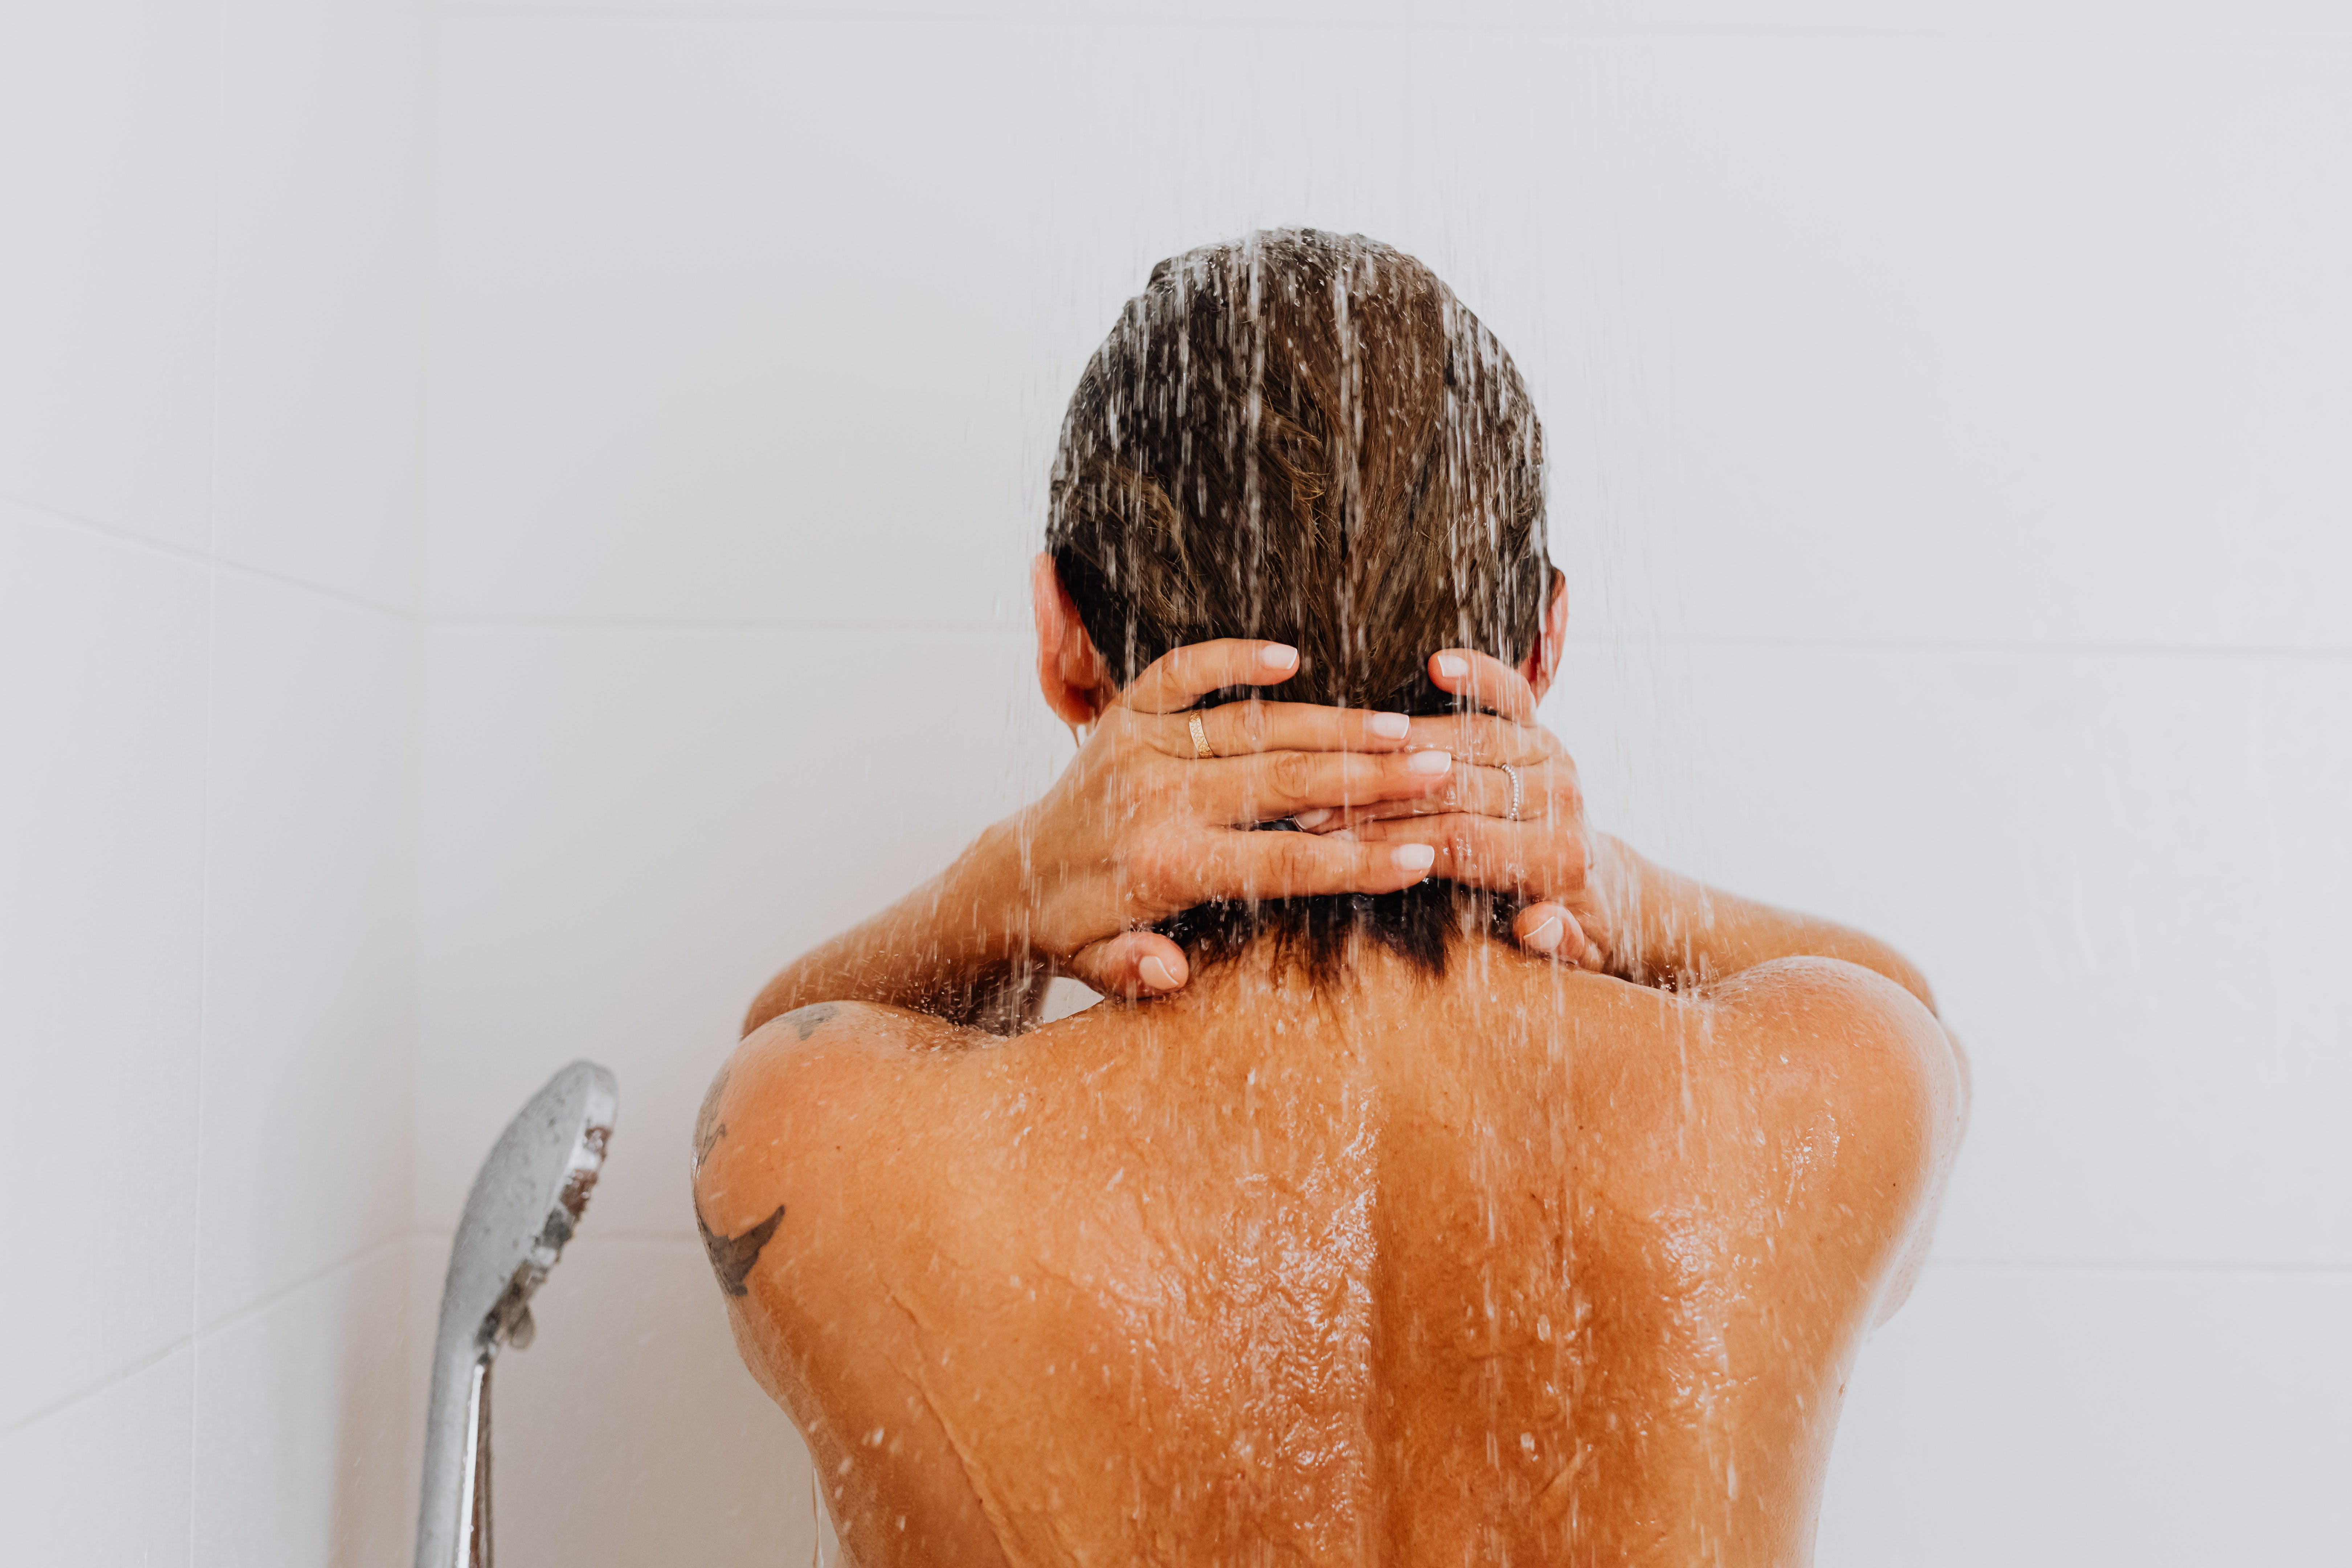 Hop into a hot shower to let that stubborn marshmallow melt away. | Source: Pexels